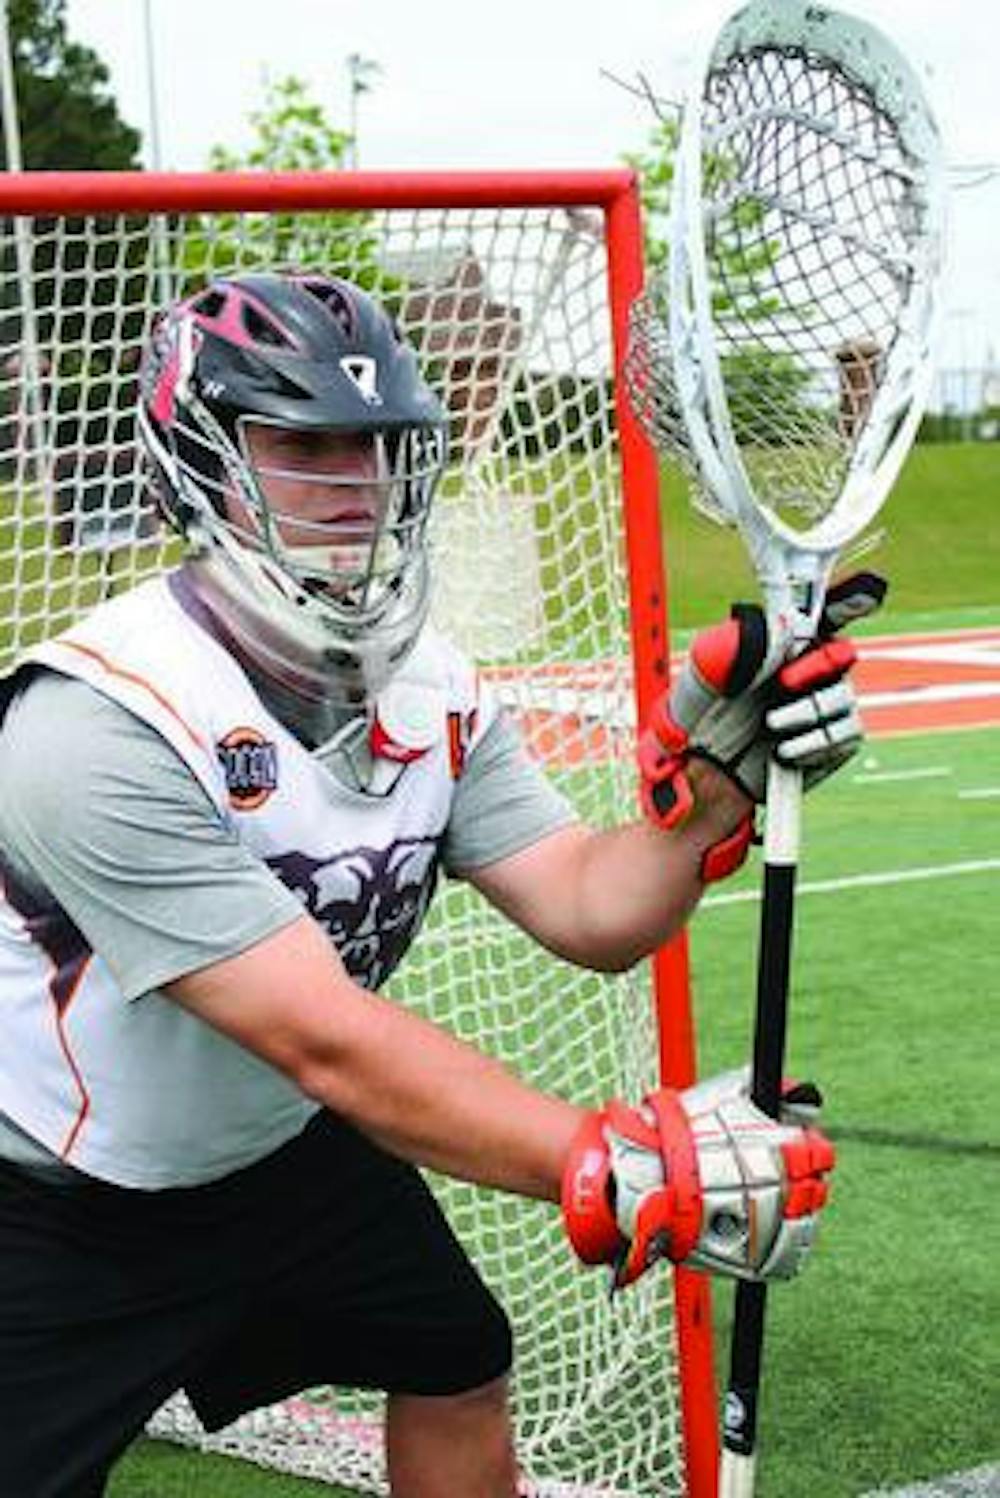 Mike Nugent, a senior, plays for the men’s lacrosse team as a goal keeper.